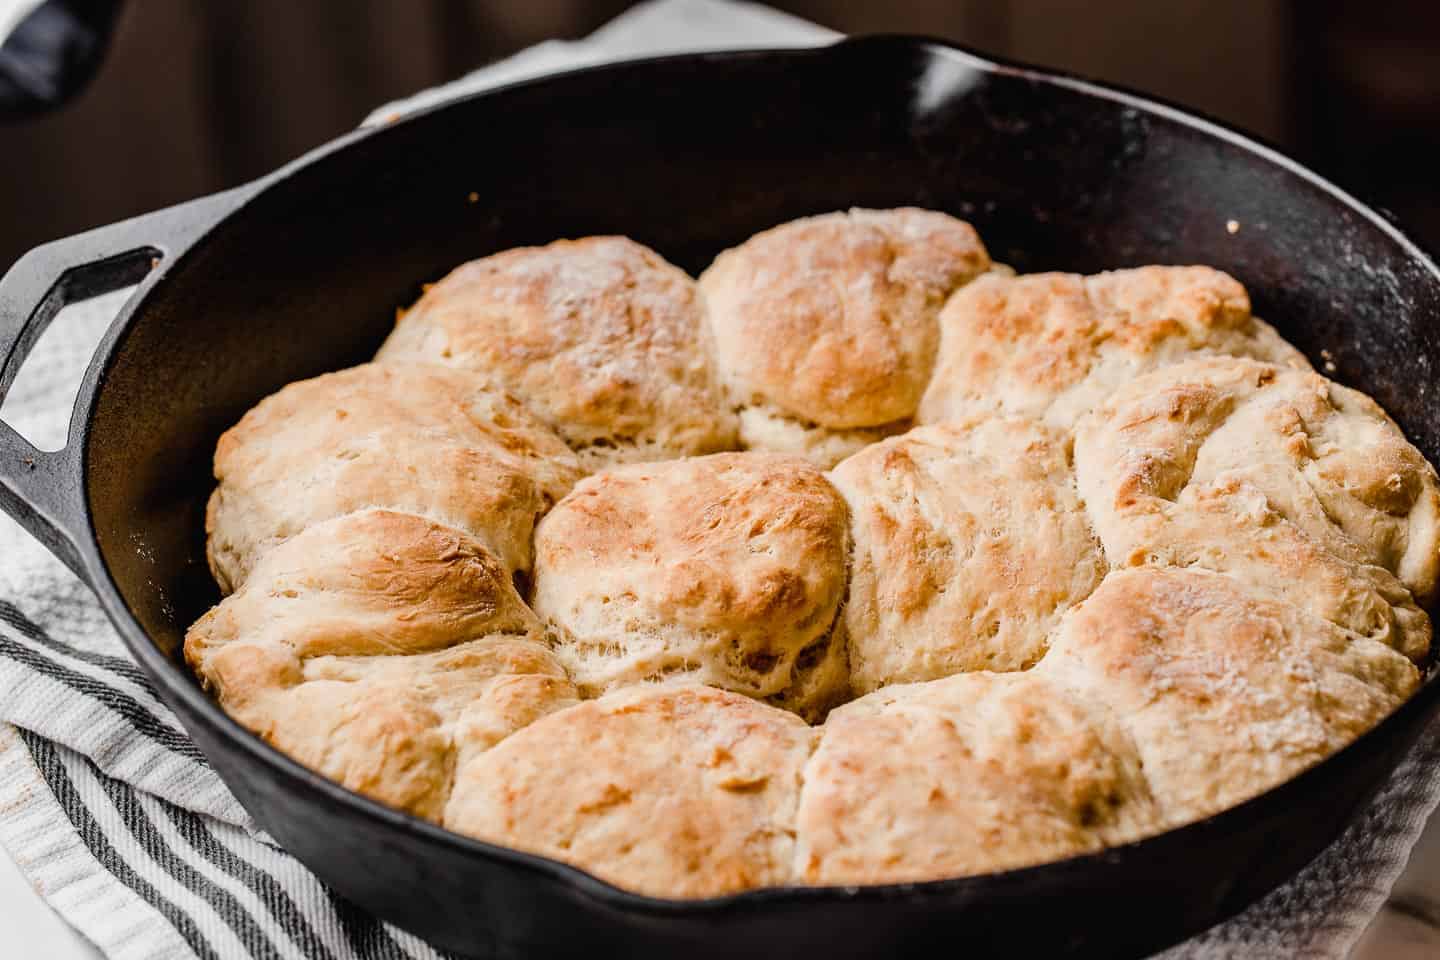 Cast iron skillet with baked sourdough biscuits.